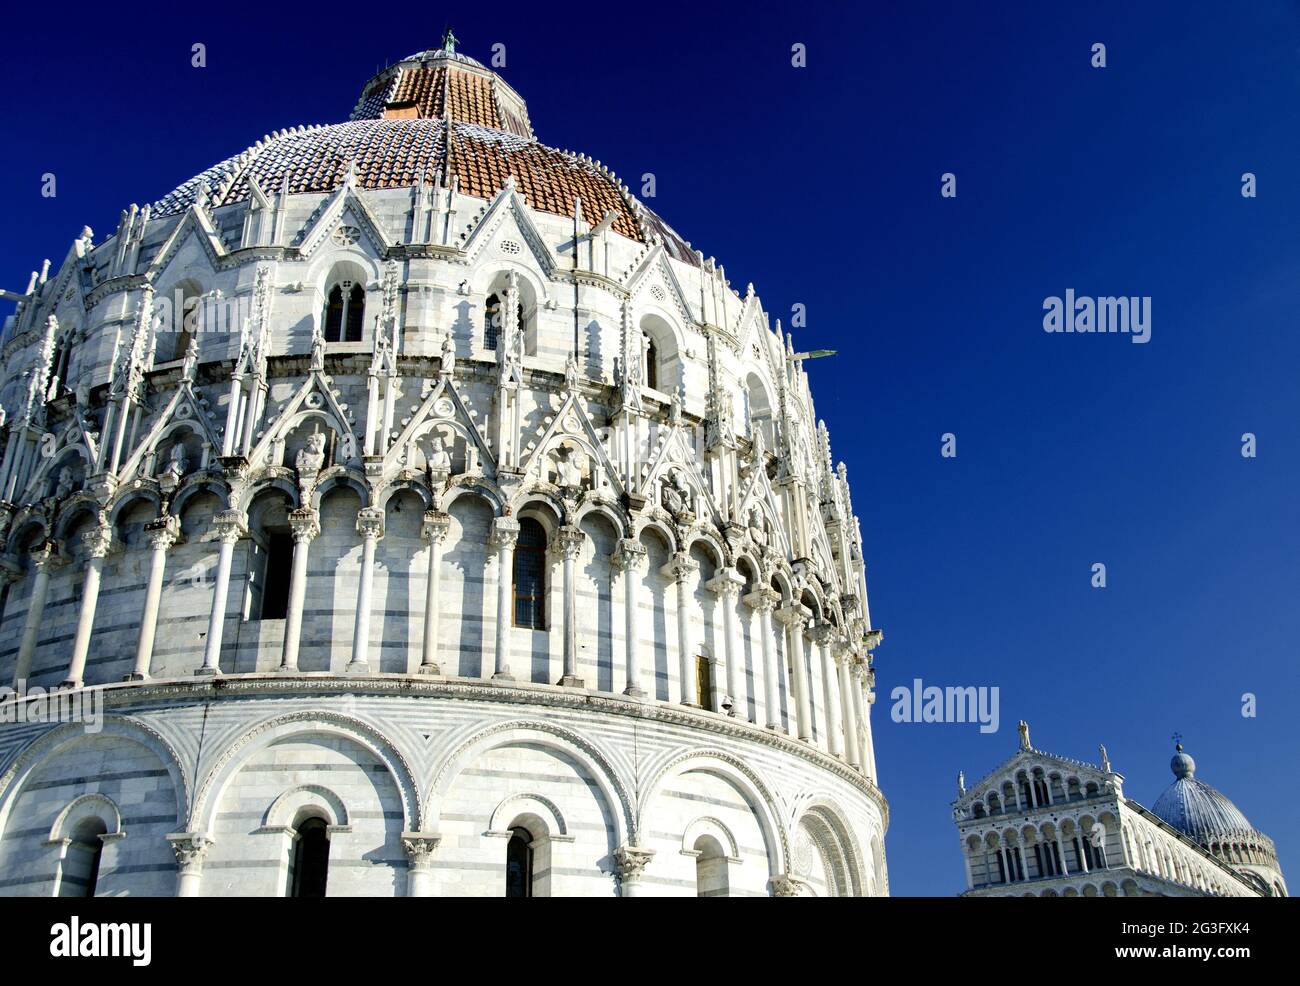 Piazza dei Miracoli in Pisa after a Snowstorm Stock Photo